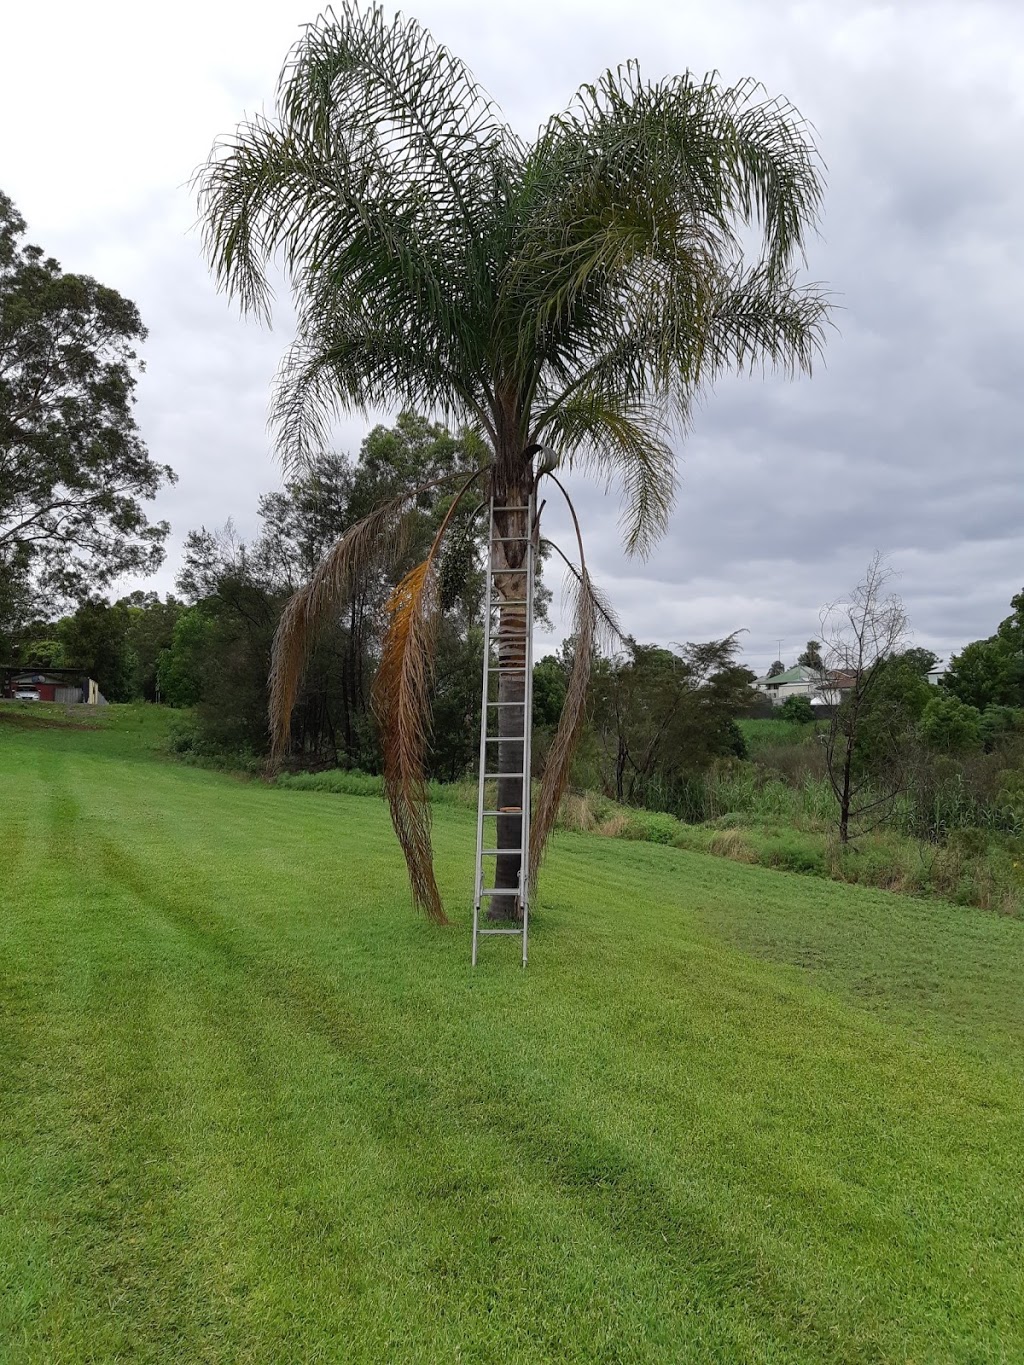 Local League Cleaning Service | 34 Ninth St, Weston NSW 2326, Australia | Phone: 0434 126 066